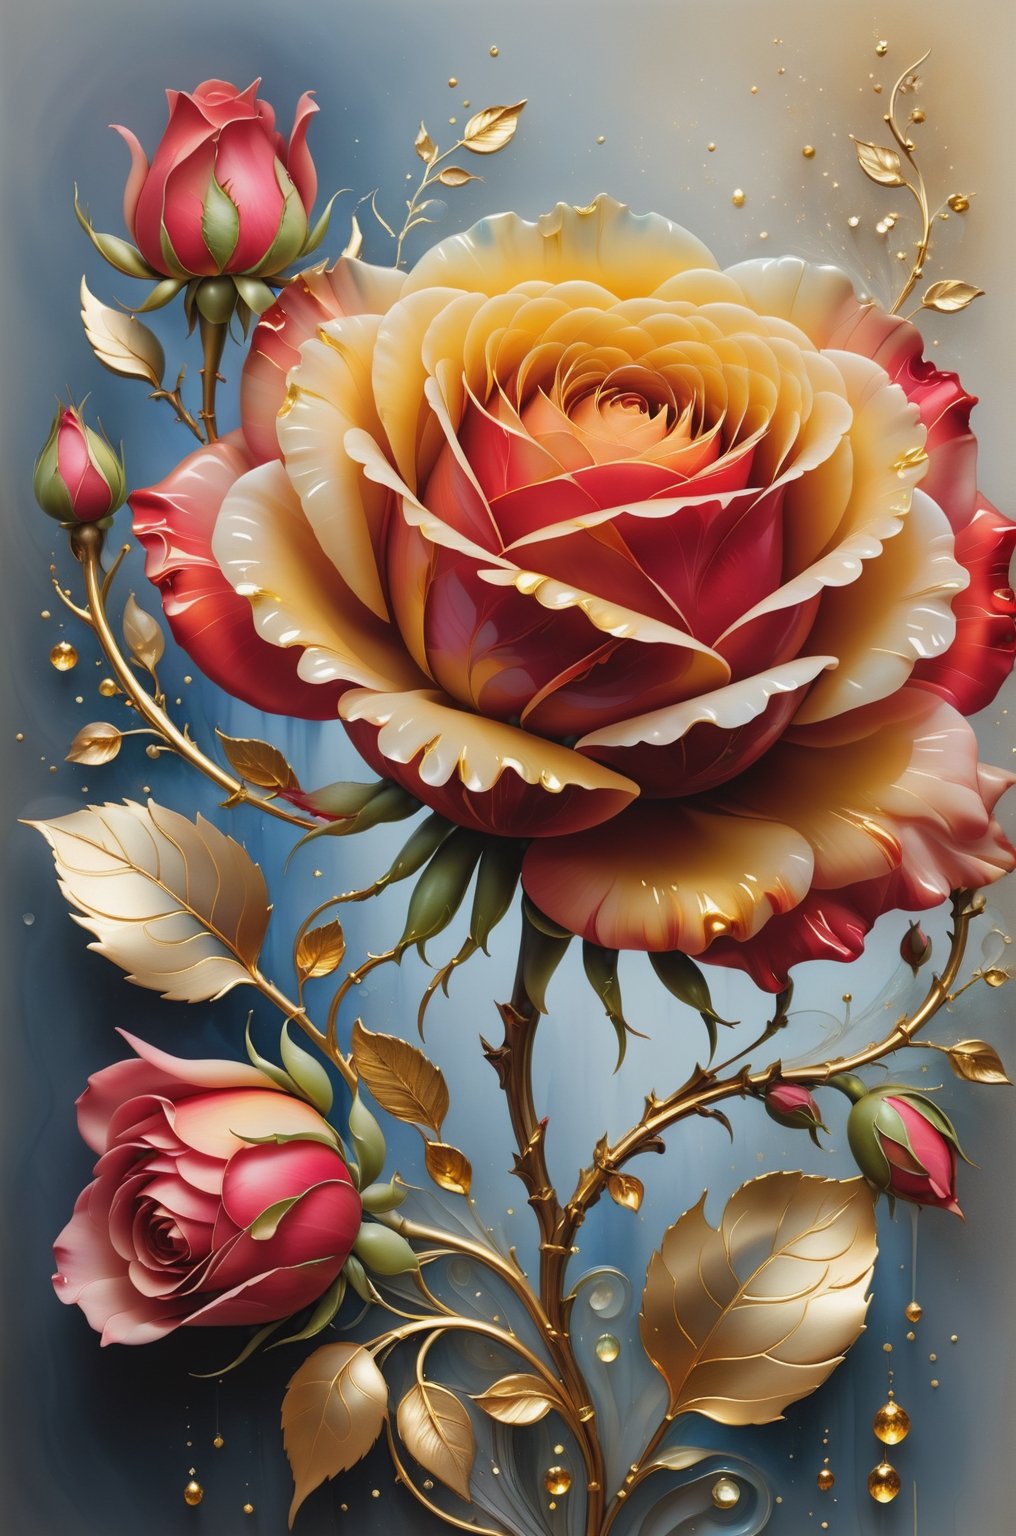 Bouquet of blooming rose, the petals show different shades of red and yellow, the center is embellished with gold texture, sparkling, elegant and unique, gently swaying, mysterious and charming, realistic and abstract art, details, very realistic, beautiful and vital, dreamlike and surreal, delicate brush strokes and rich colors, beauty and mystery, unimaginable beauty, Ornate And Intricate, transparent, translucent, Agate material, jade material, BY Anne Bachelier, sketch artstyle 